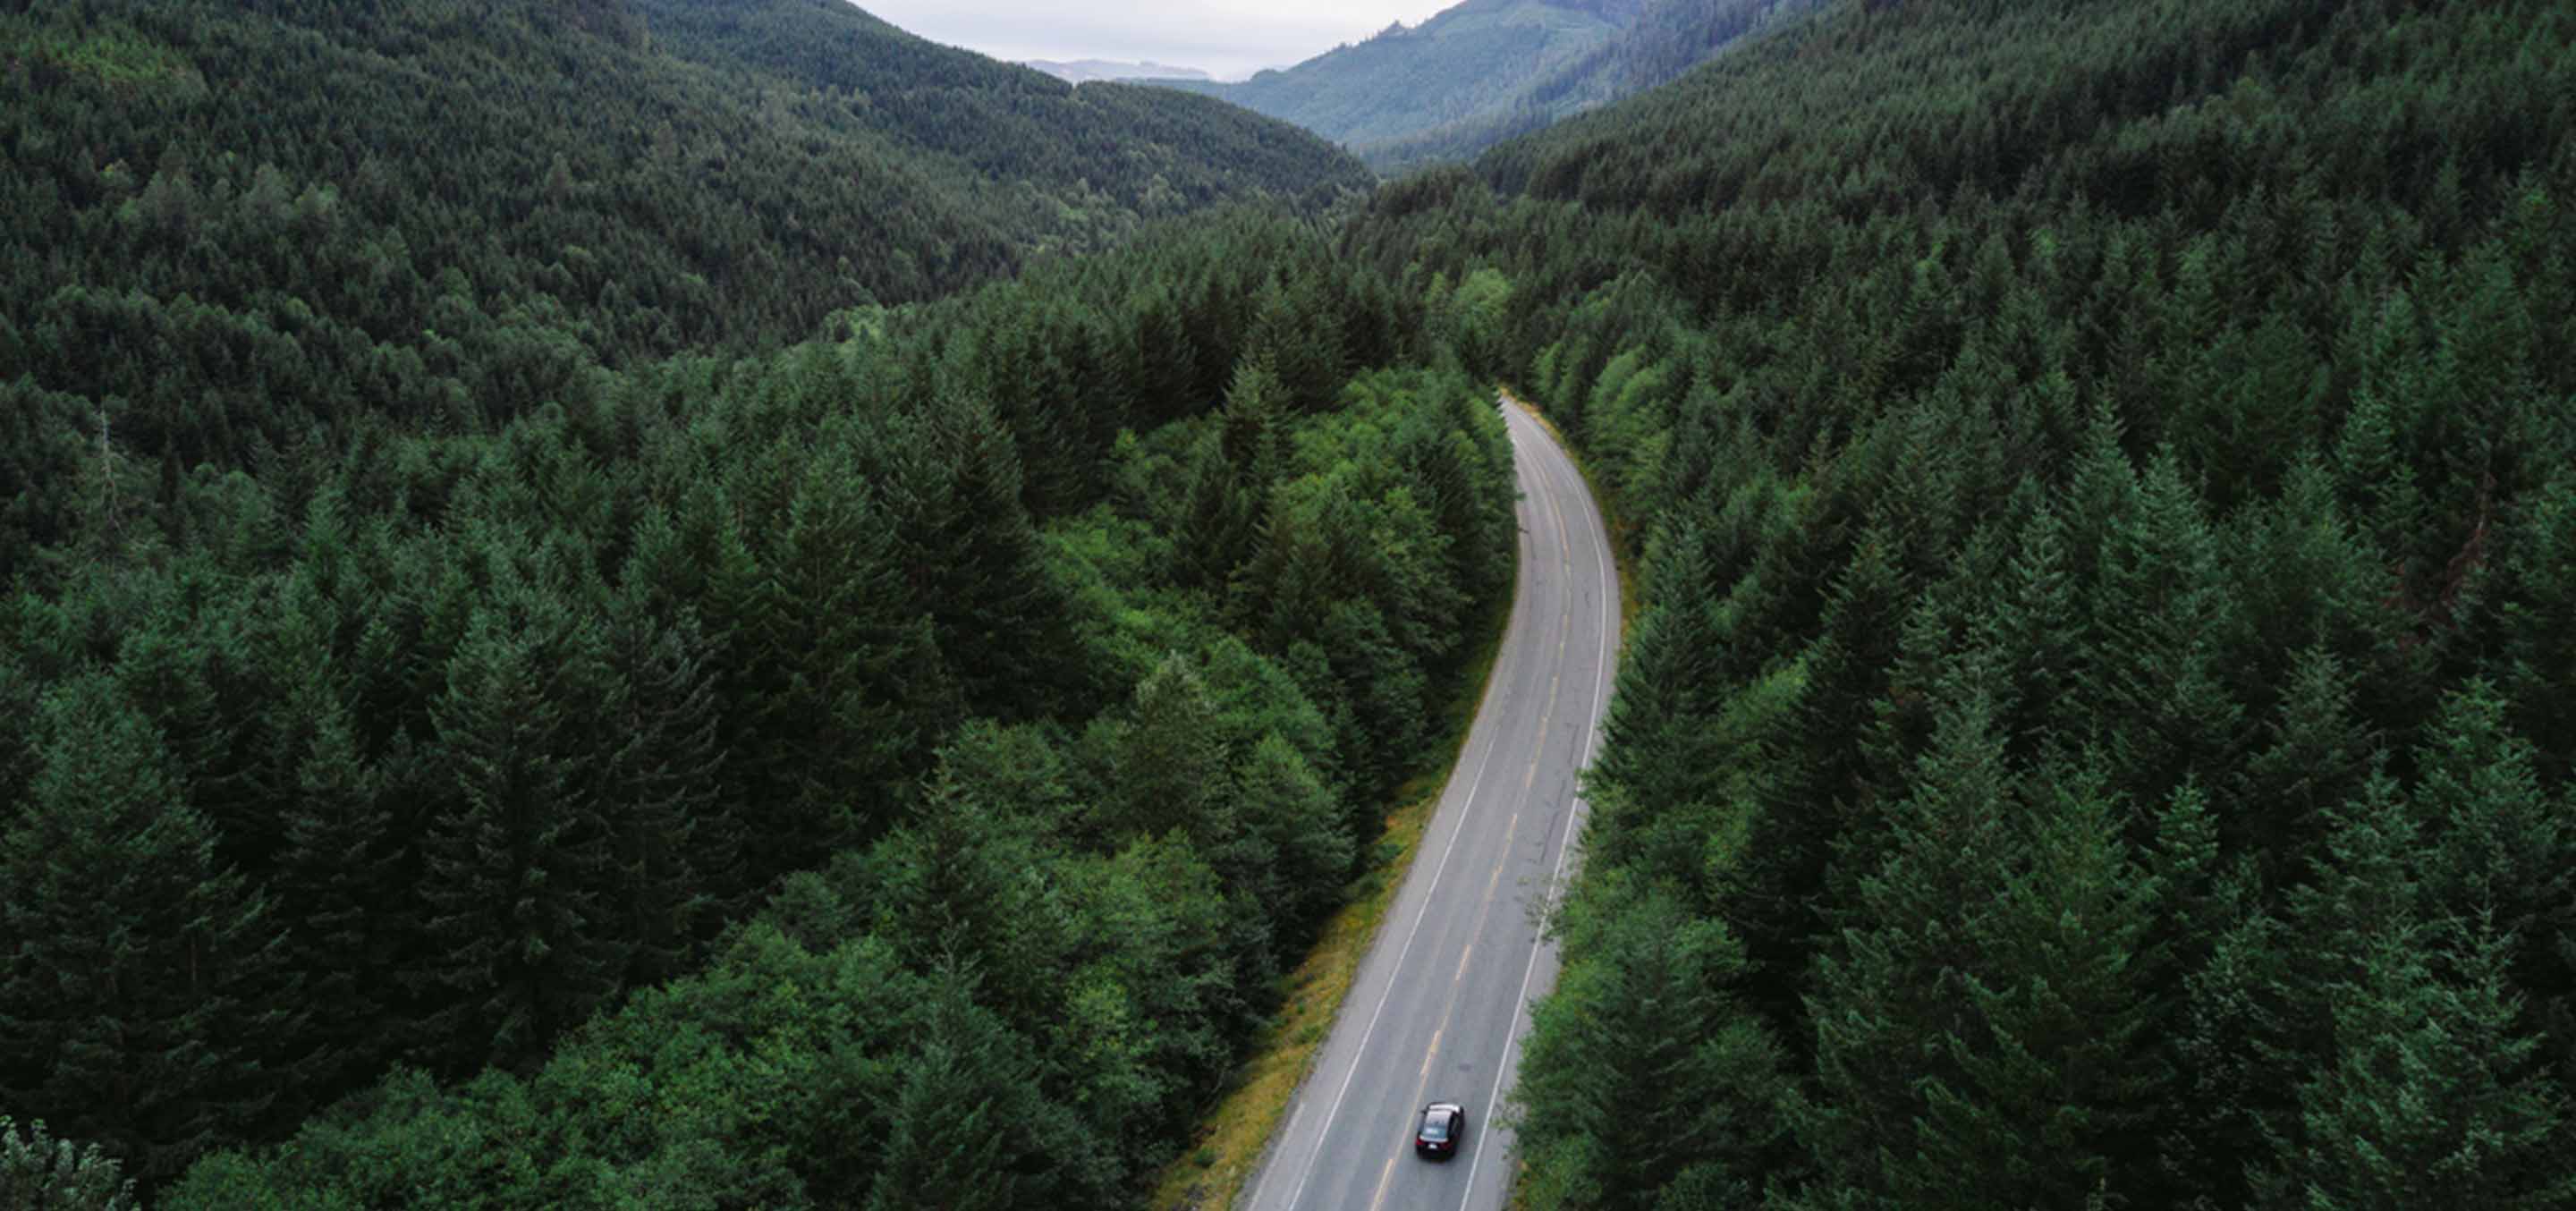 Driving Vancouver Island by Tourism Vancouver Island/Ben Giesbrecht